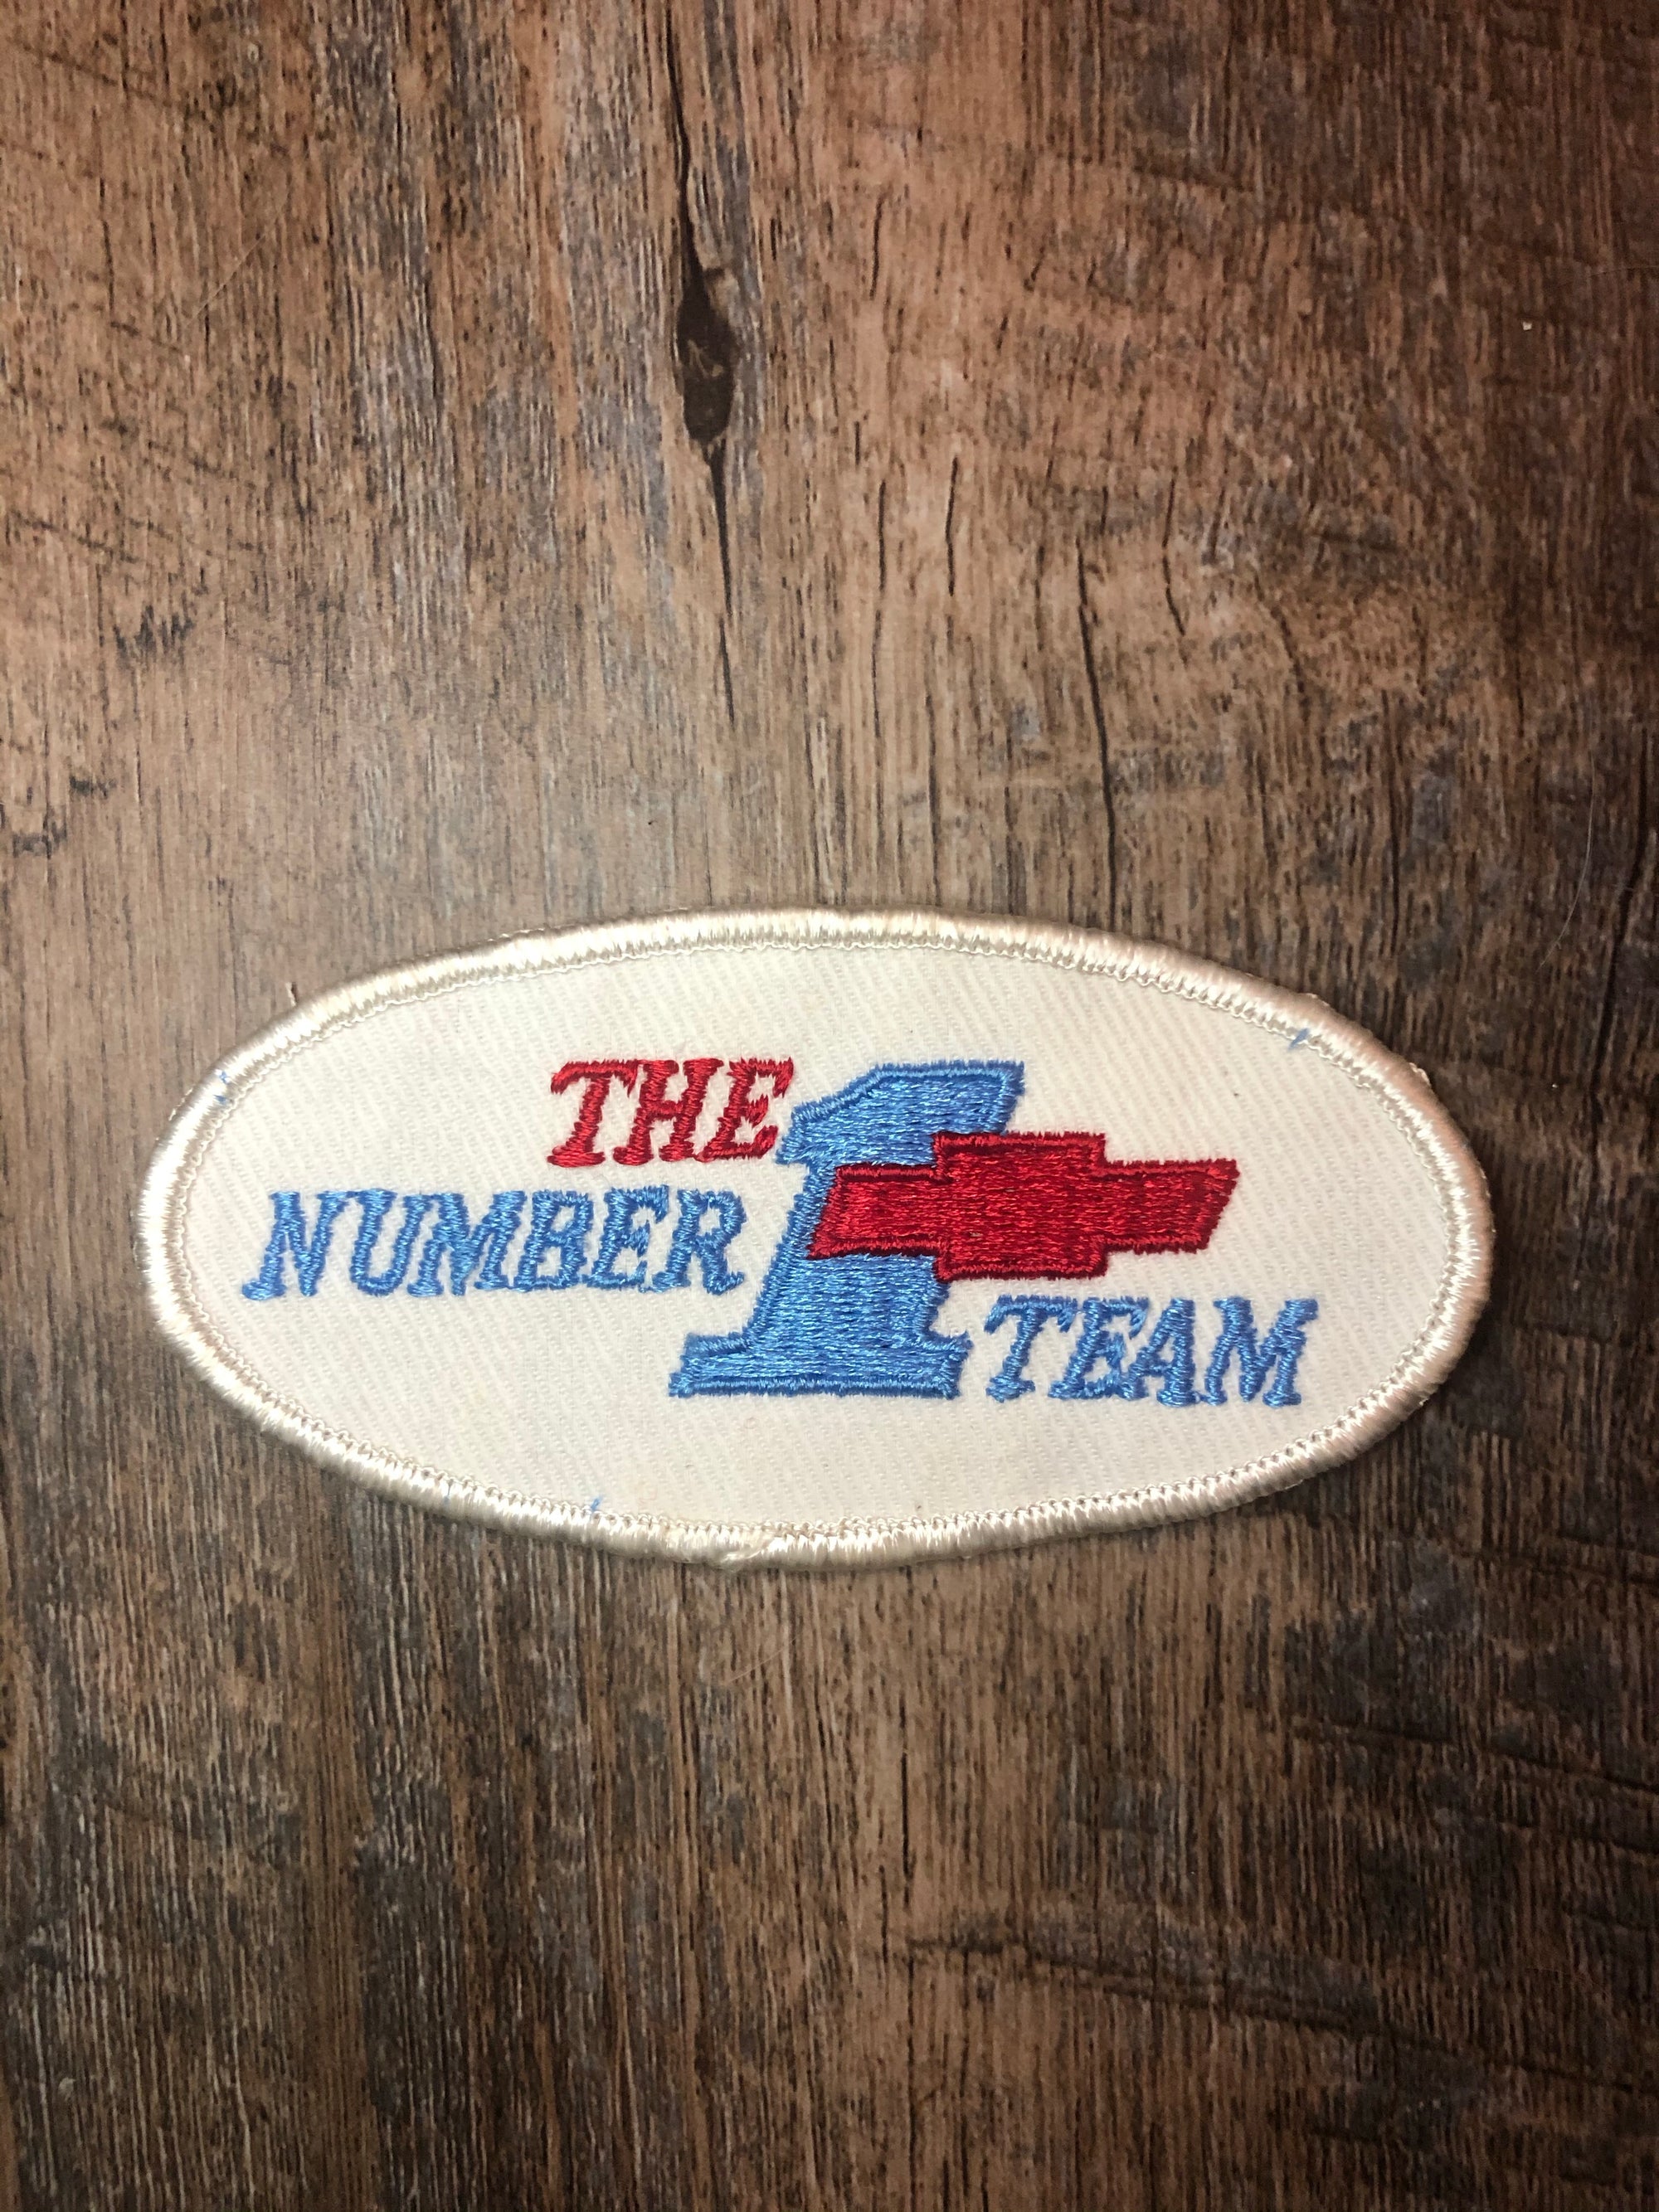 Vintage The Number 1 Team Chevy